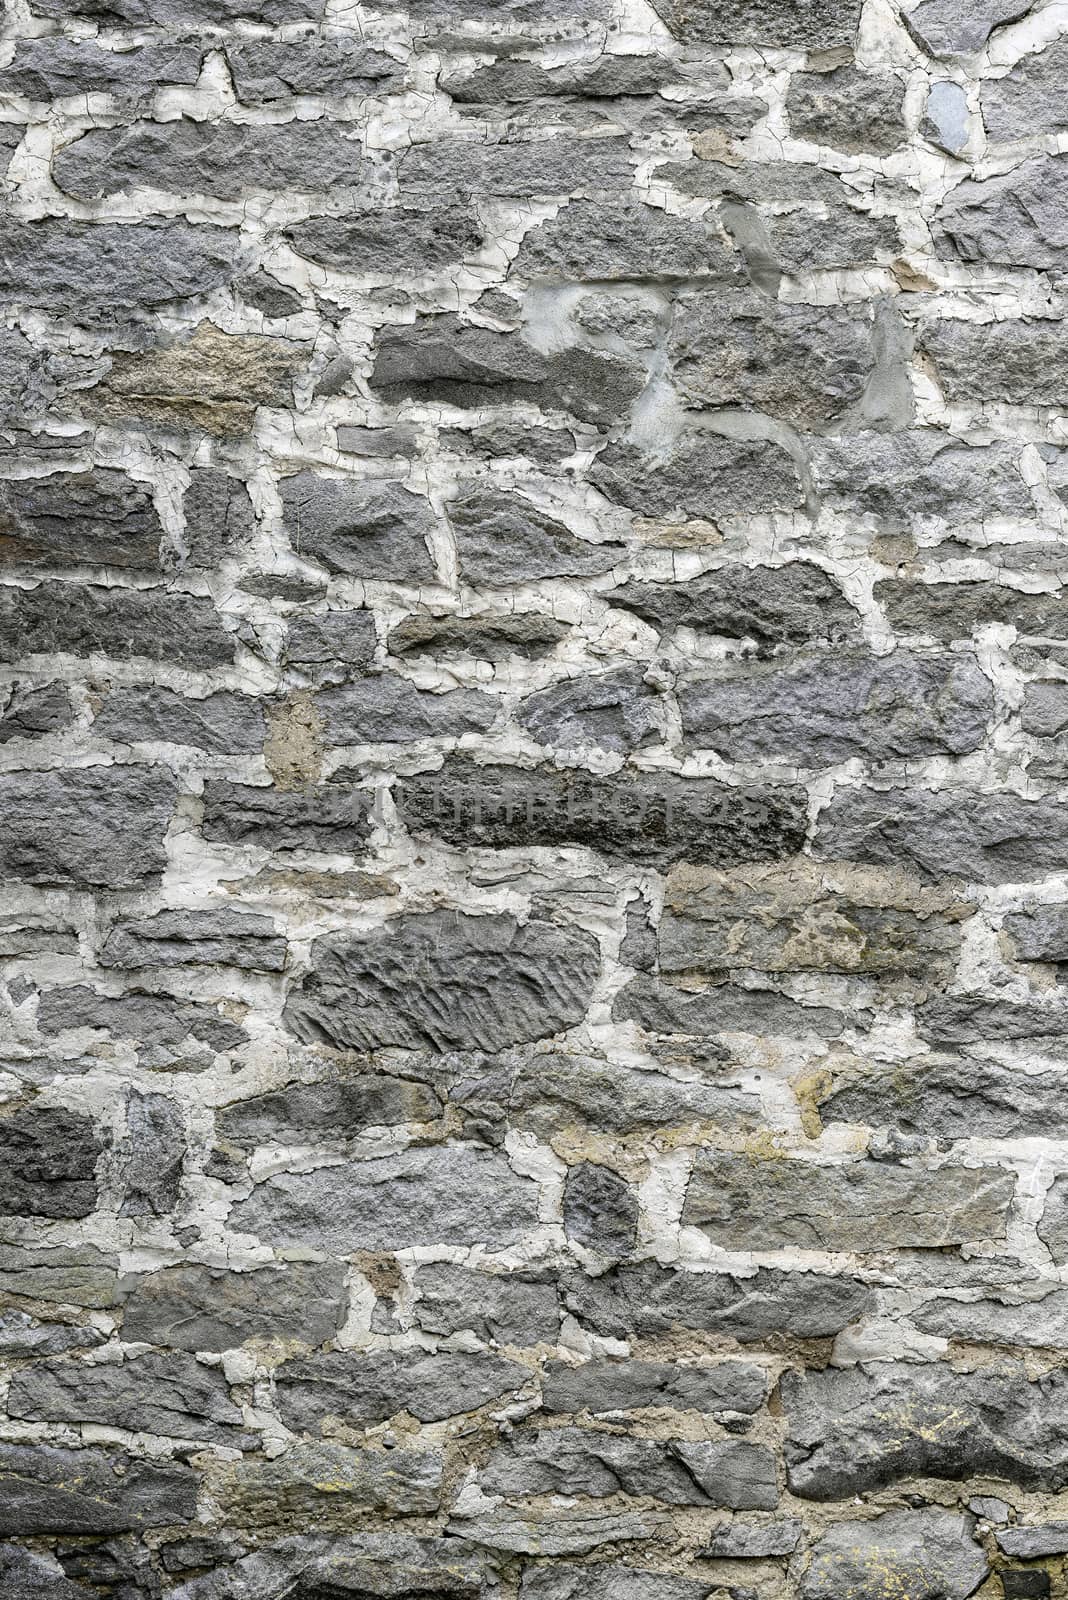 Vertical gray stone wall.  Extremely old